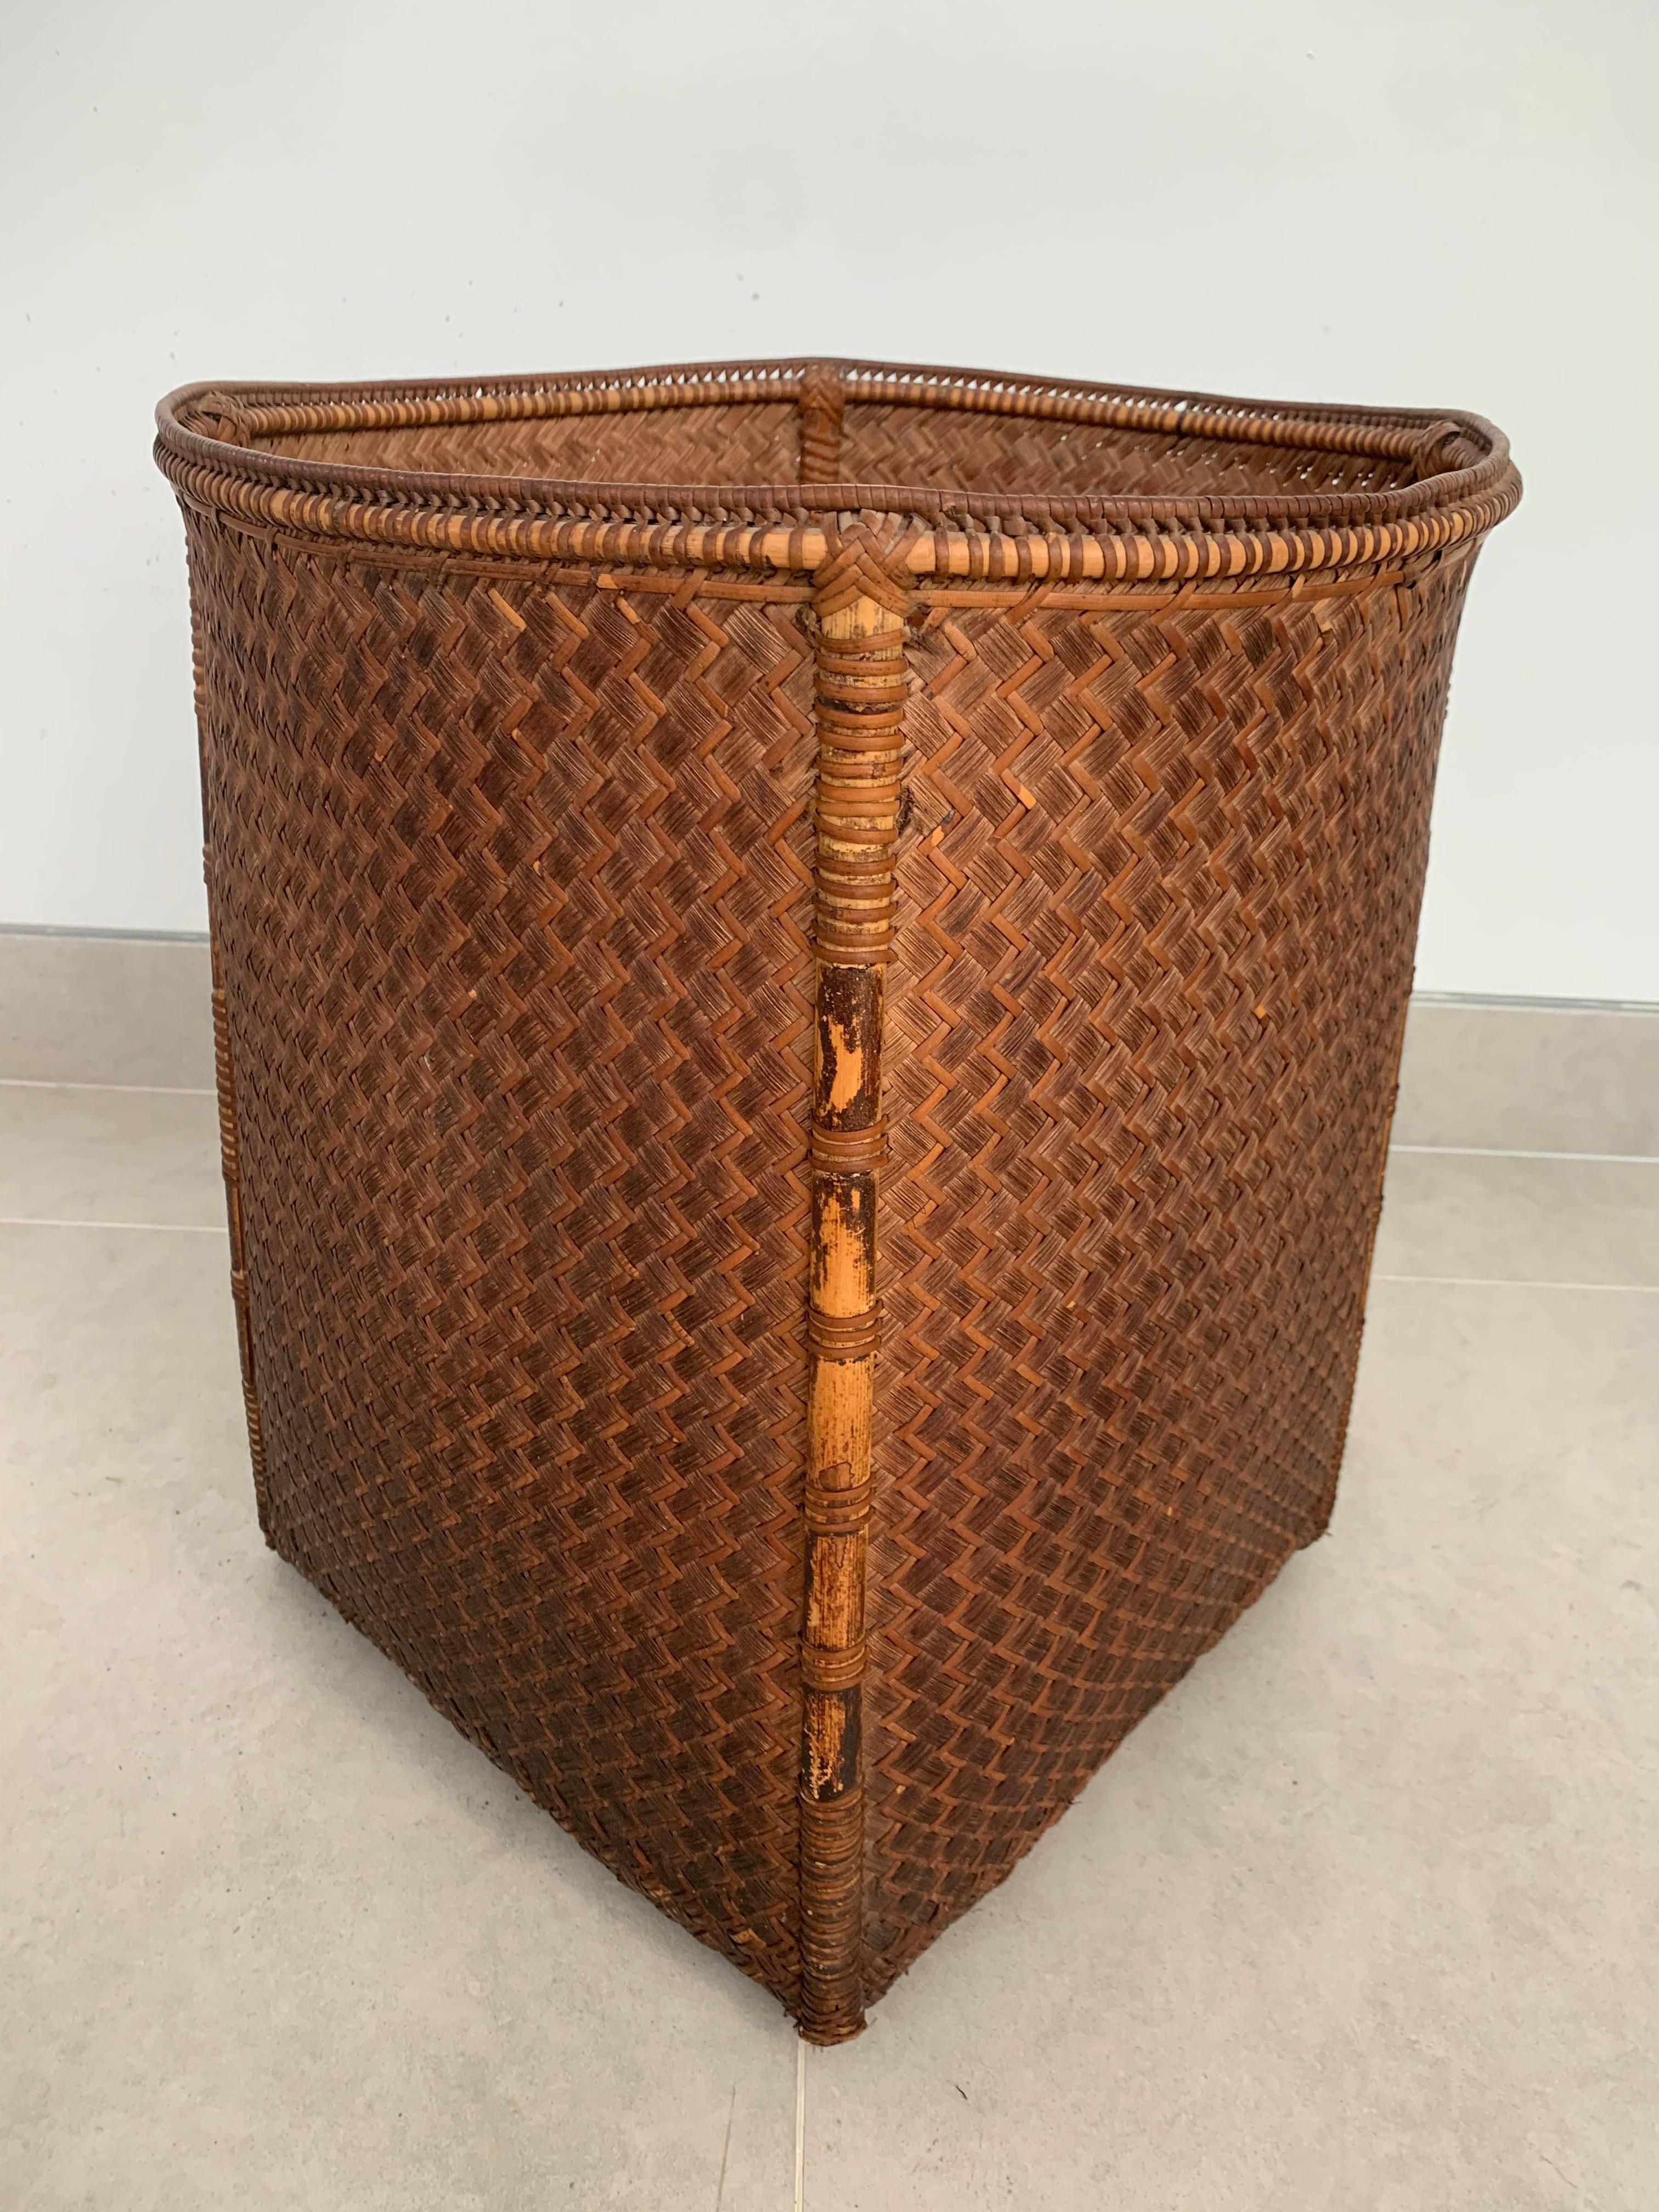 Rattan Basket Dayak Tribe Hand-Woven from Kalimantan, Borneo, Mid 20th Century For Sale 3